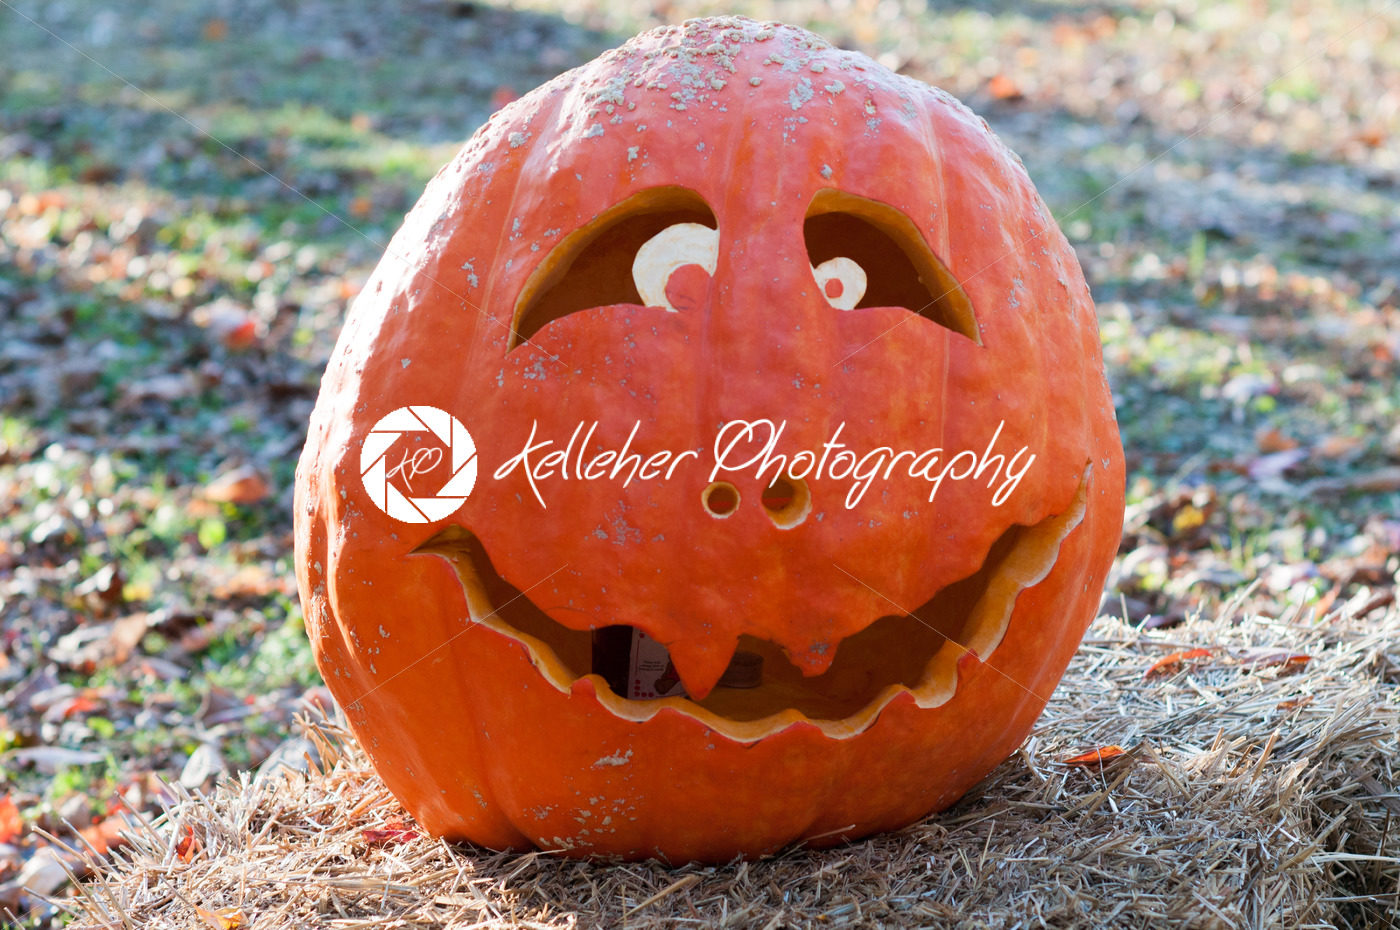 CHADDS FORD, PA – OCTOBER 26: The Great Pumpkin Carve carving contest on October 26, 2013 - Kelleher Photography Store